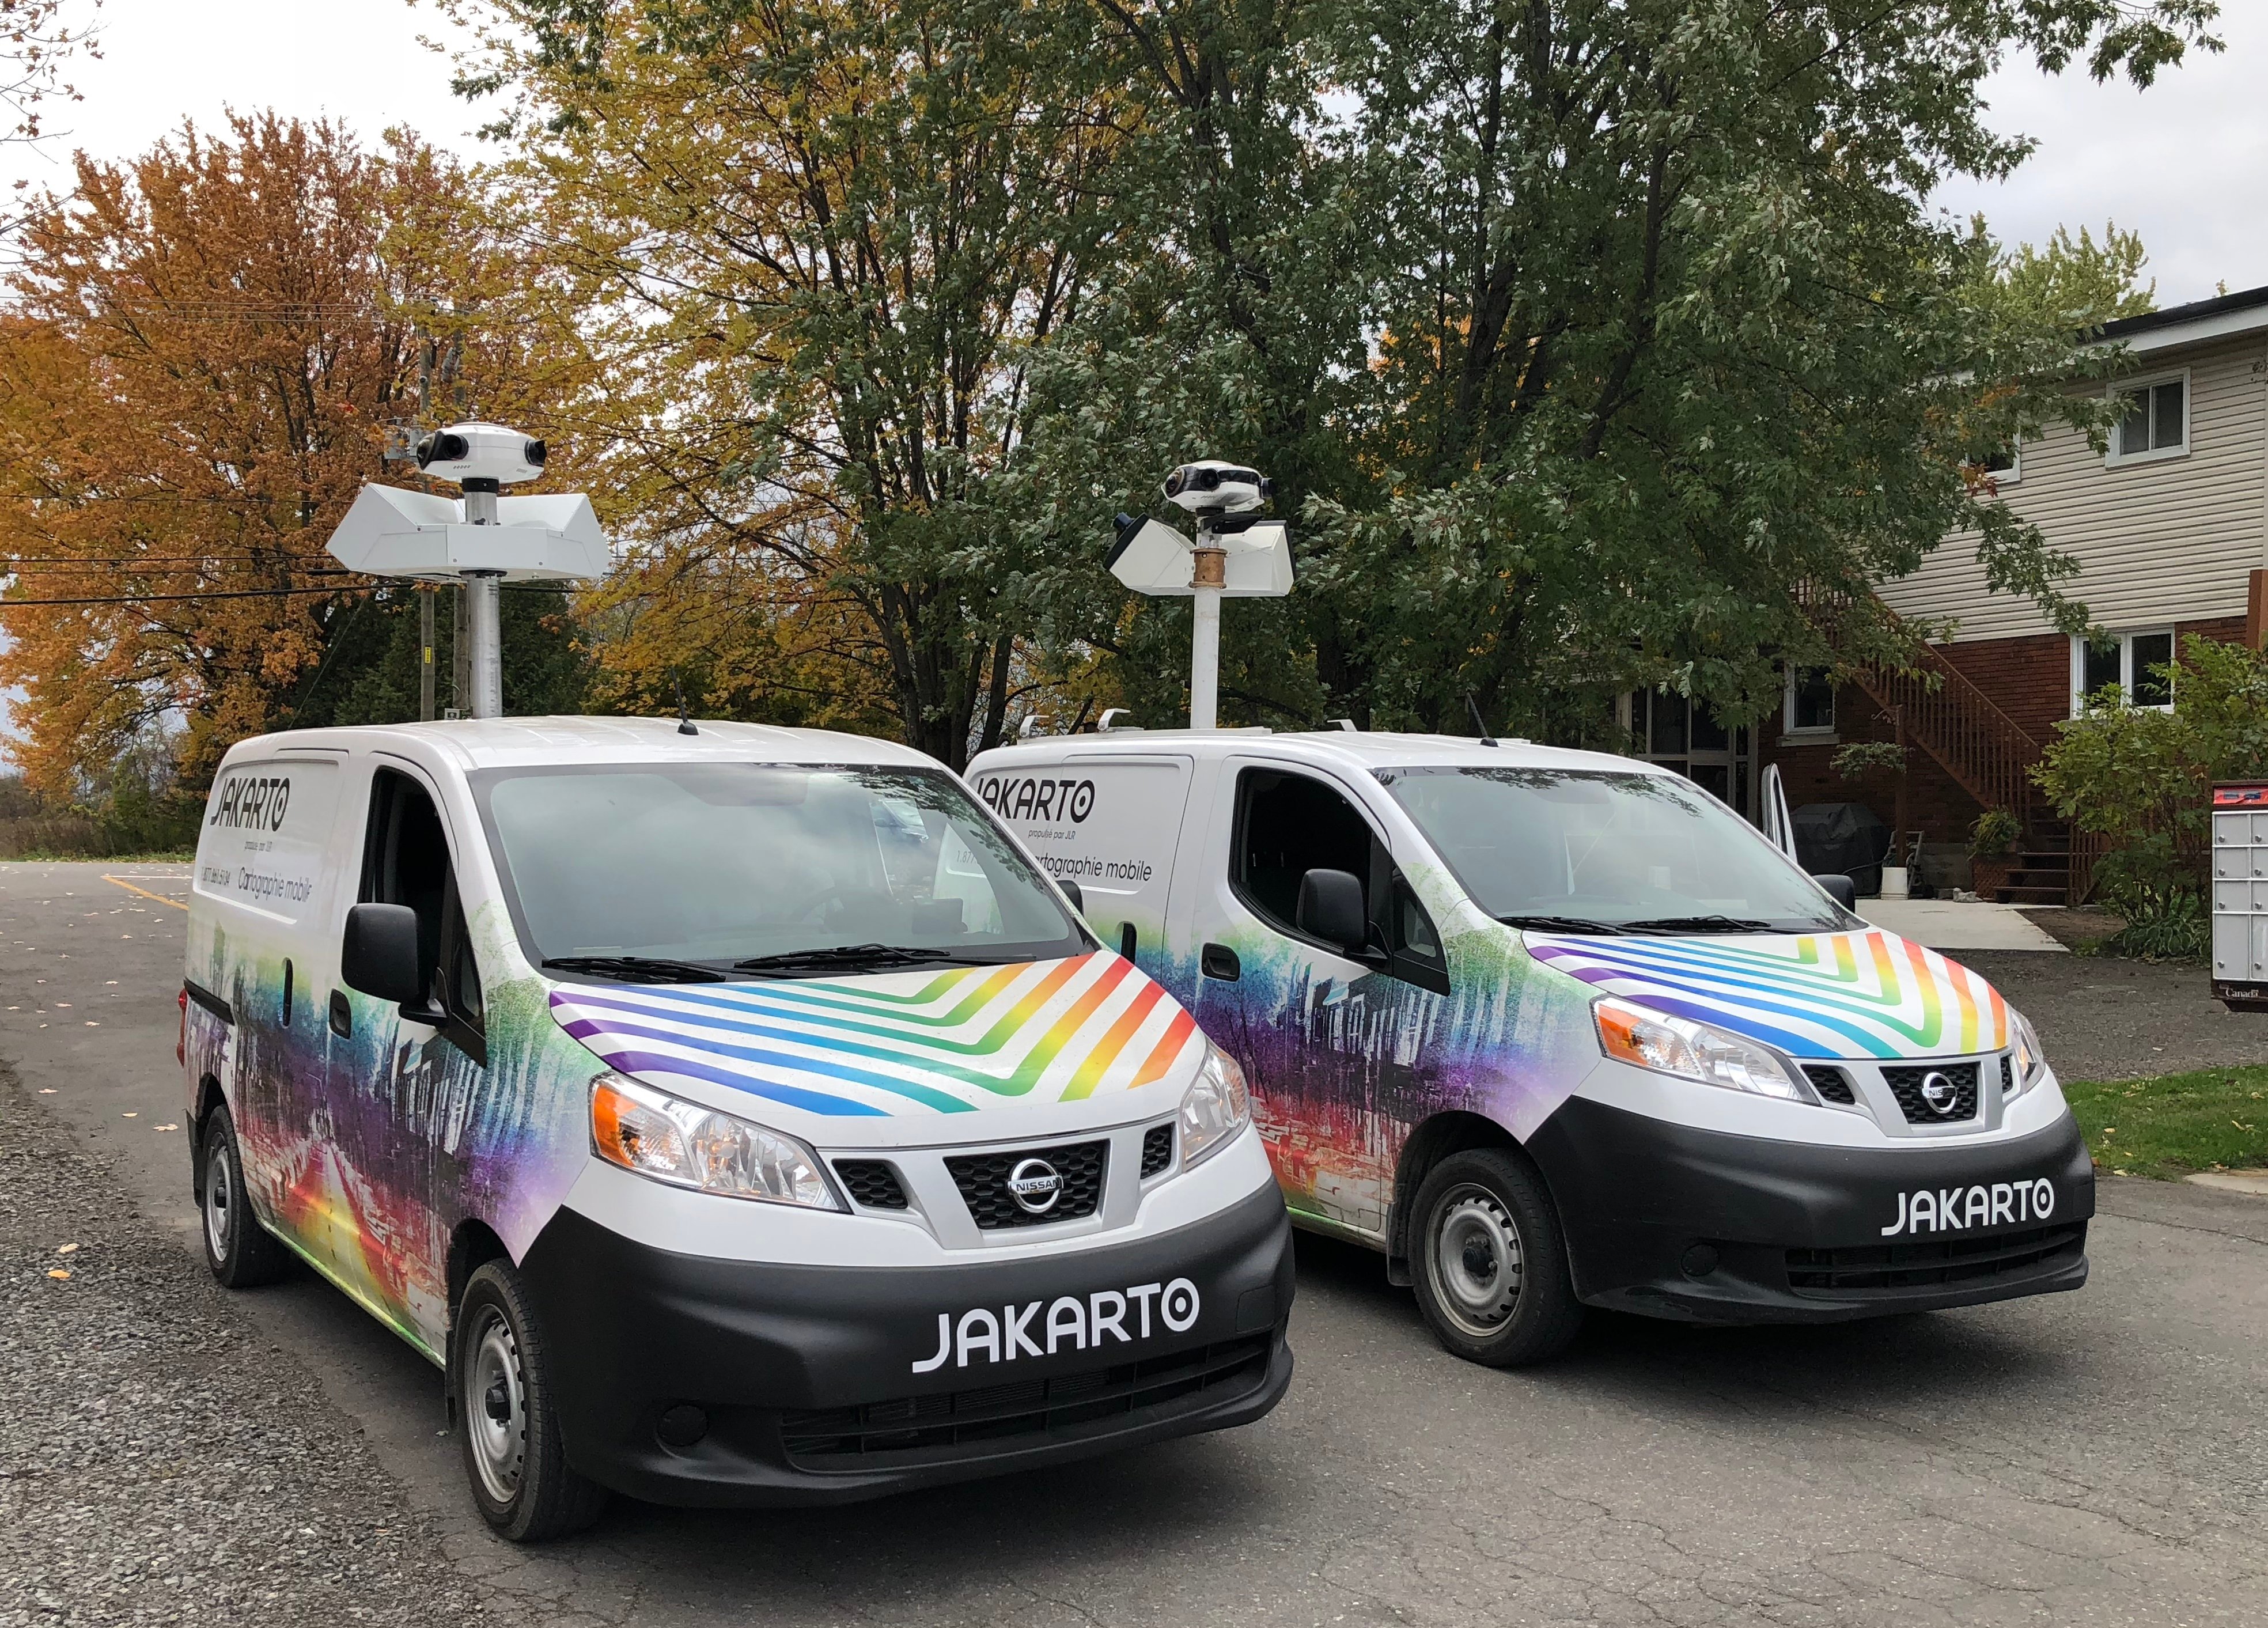 Jakarto’s mobile mapping units